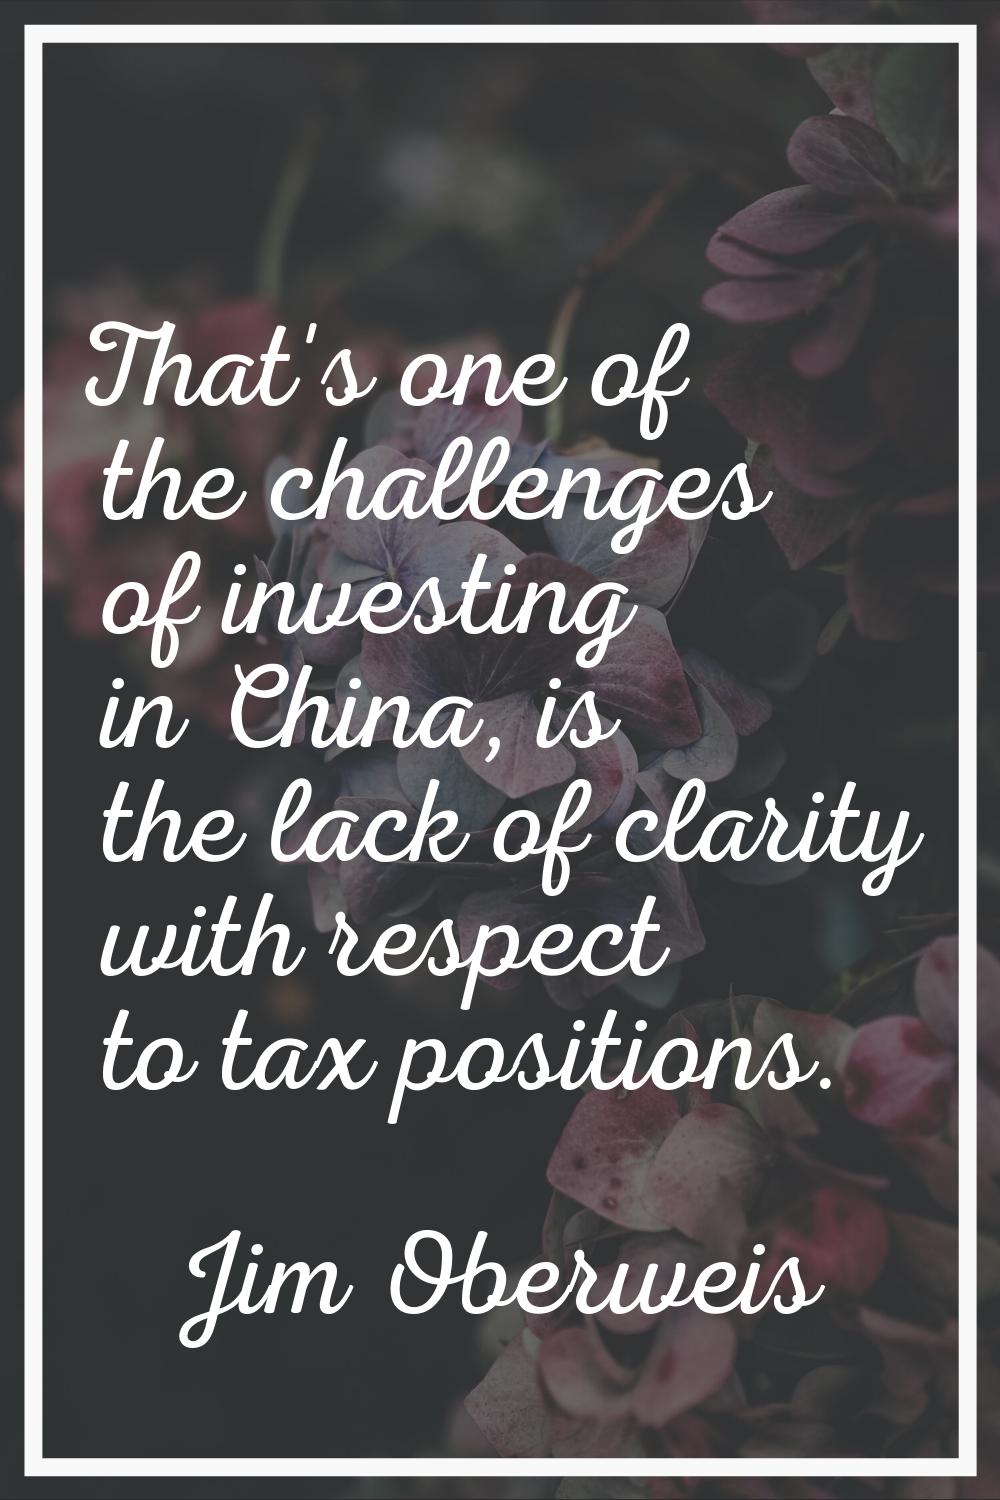 That's one of the challenges of investing in China, is the lack of clarity with respect to tax posi